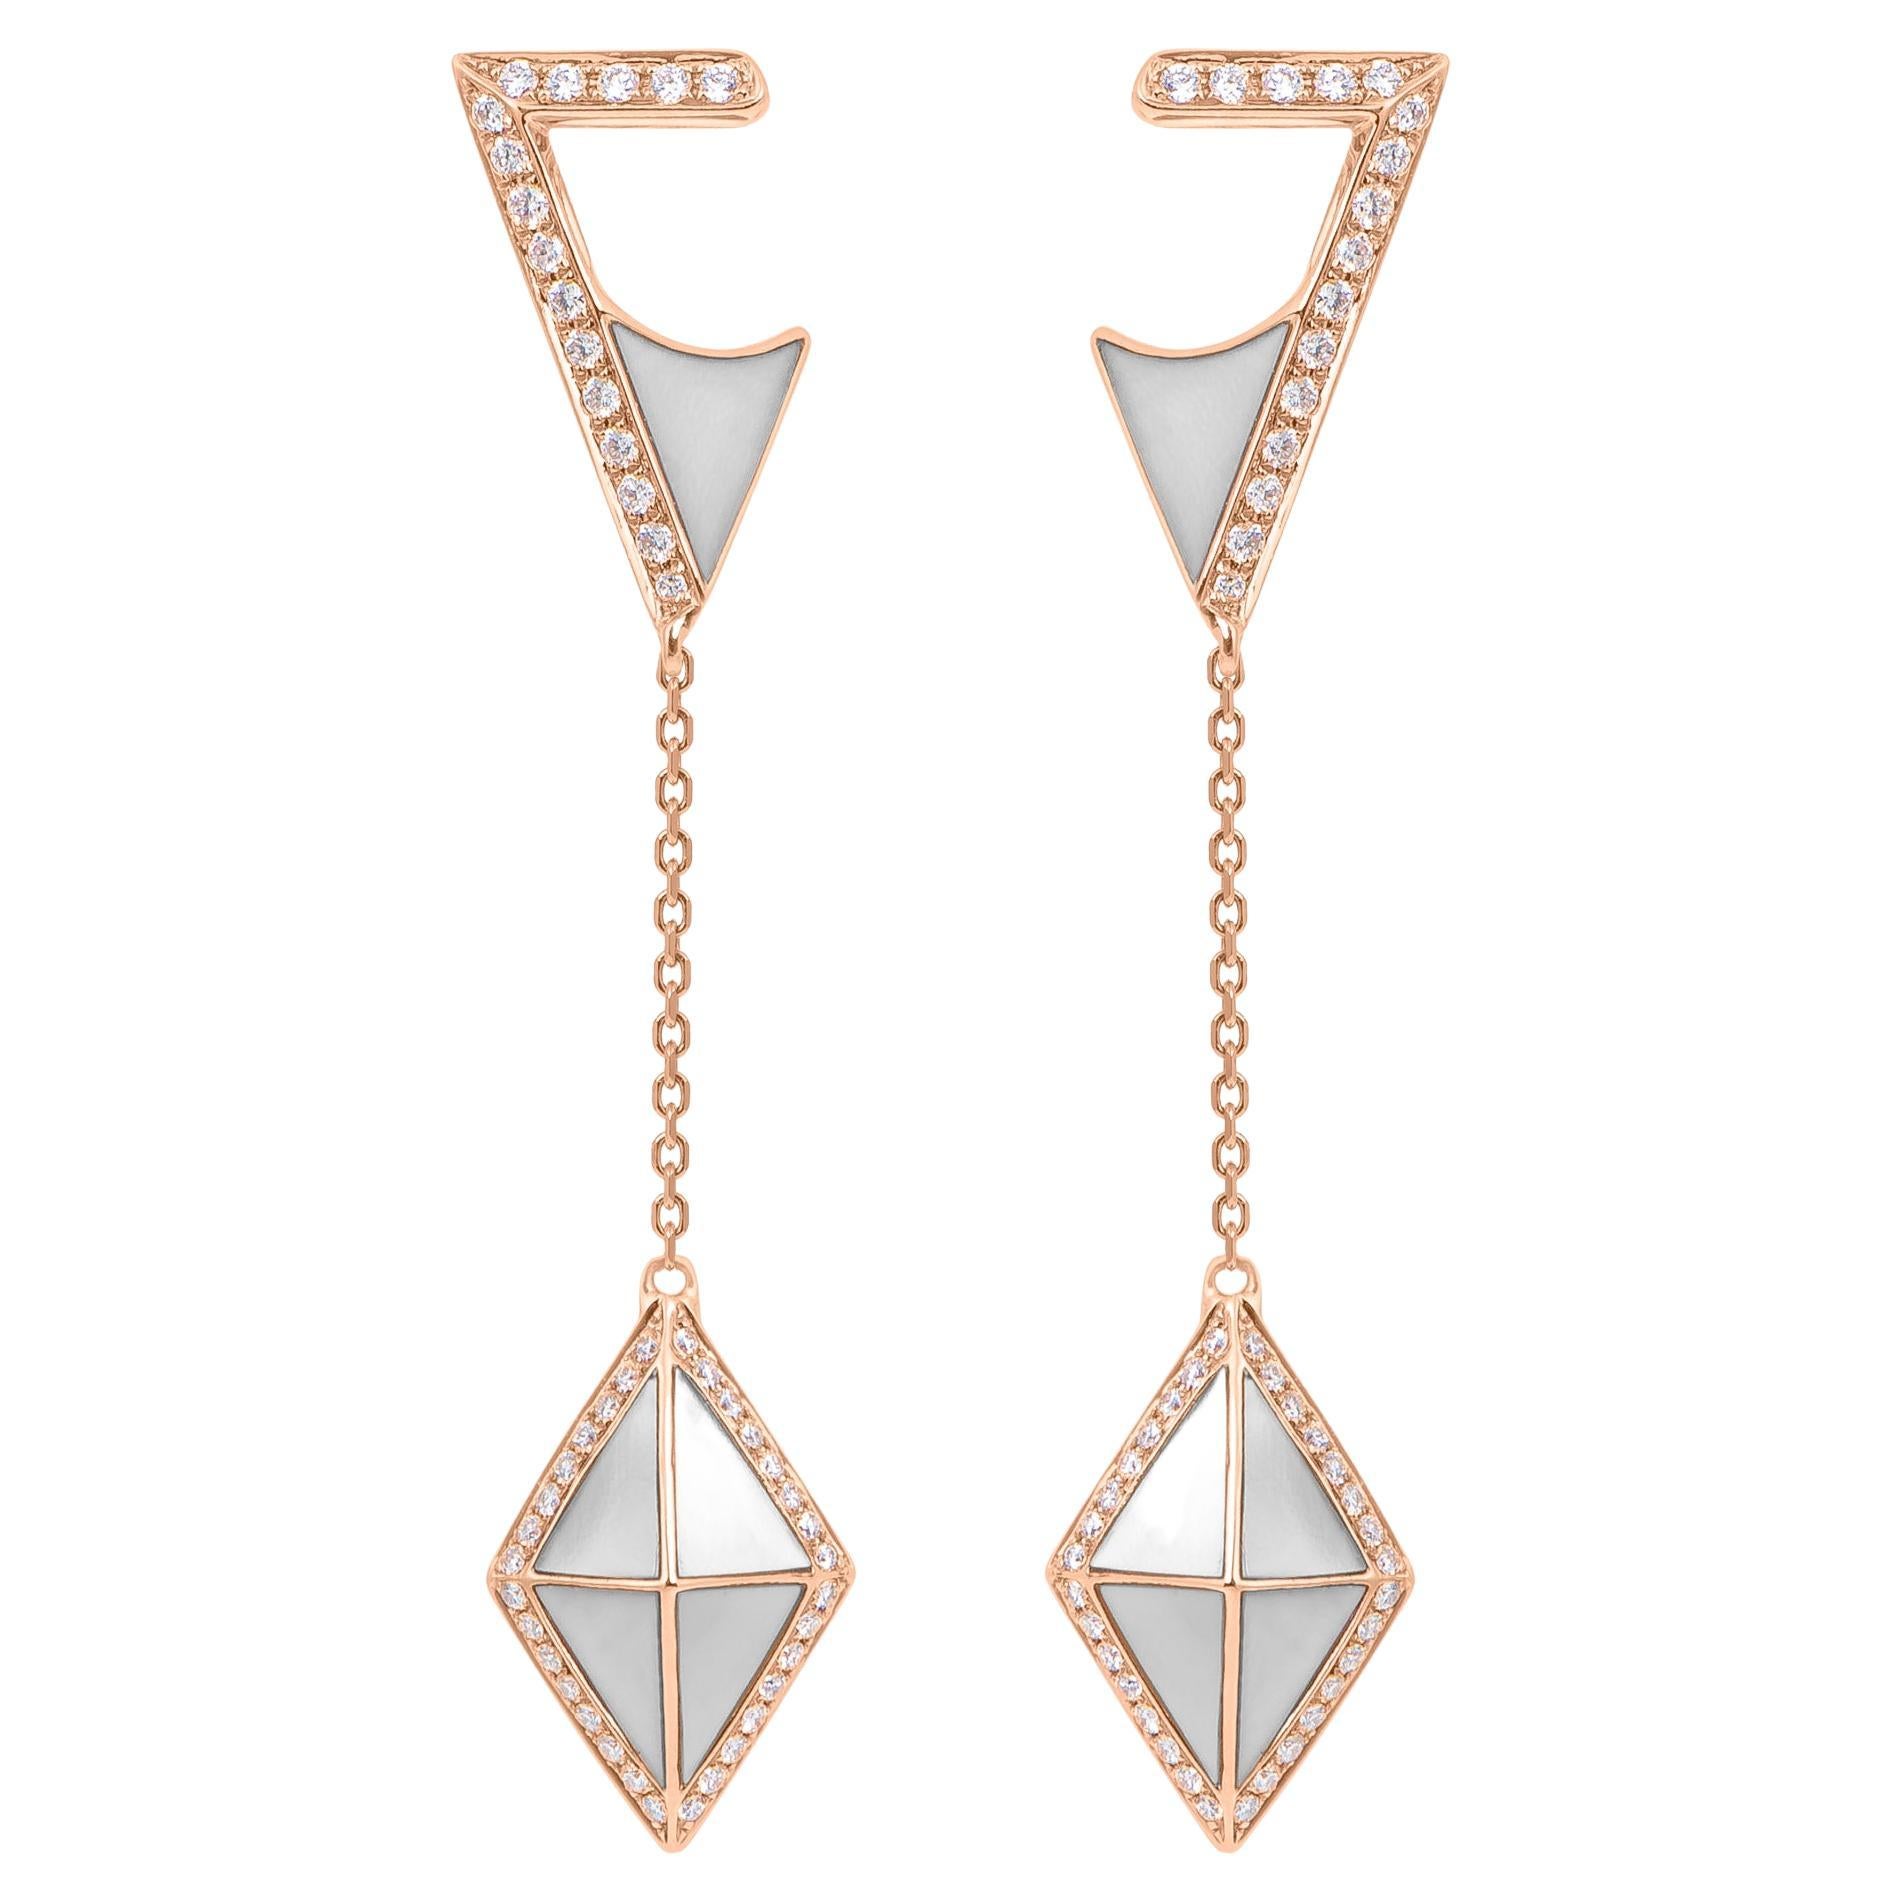 Tetra Tilt Drop Earrings with White Mother of Pearl & Diamonds in 18k Rose Gold For Sale